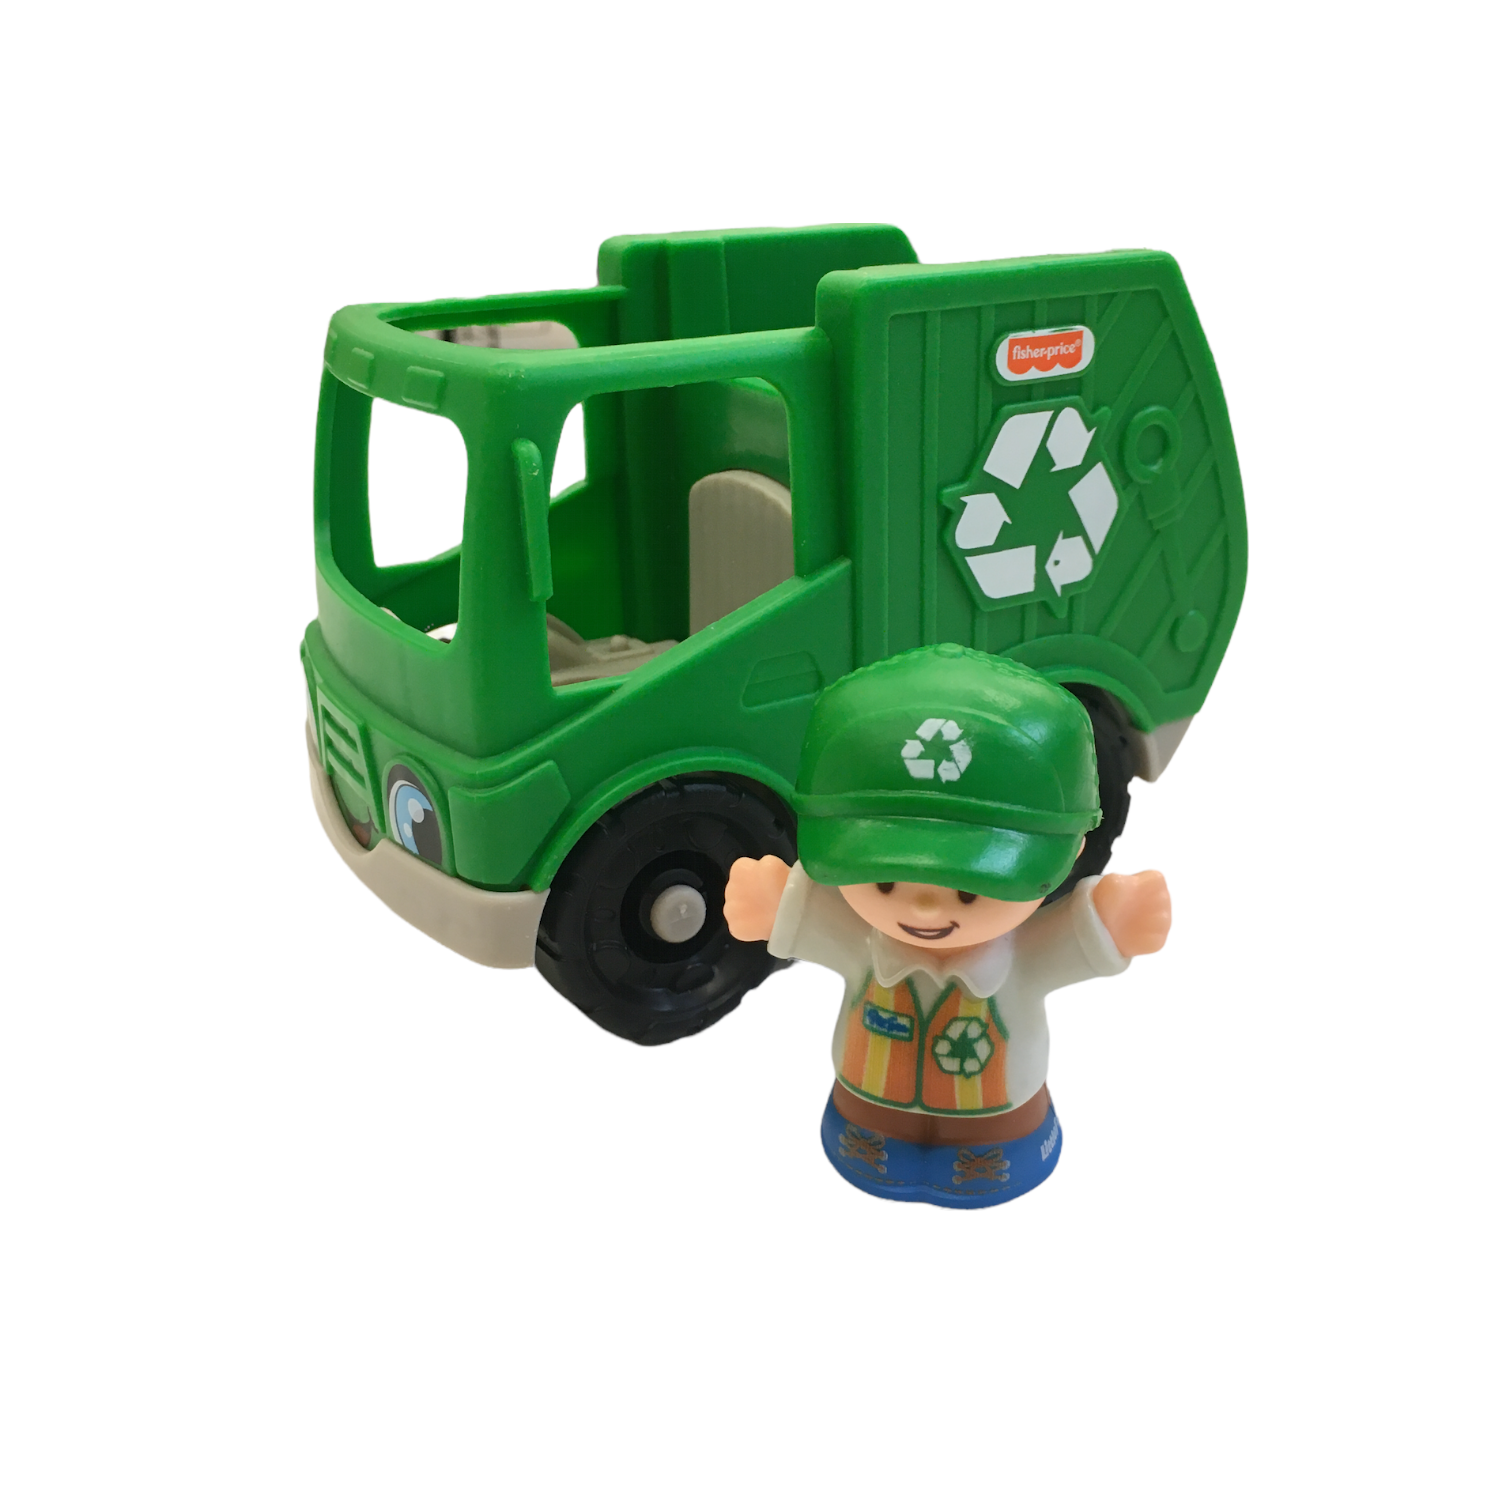 Recycle Truck, Toys

#resalerocks #pipsqueakresale #vancouverwa #portland #reusereducerecycle #fashiononabudget #chooseused #consignment #savemoney #shoplocal #weship #keepusopen #shoplocalonline #resale #resaleboutique #mommyandme #minime #fashion #reseller                                                                                                                                      Cross posted, items are located at #PipsqueakResaleBoutique, payments accepted: cash, paypal & credit cards. Any flaws will be described in the comments. More pictures available with link above. Local pick up available at the #VancouverMall, tax will be added (not included in price), shipping available (not included in price, *Clothing, shoes, books & DVDs for $6.99; please contact regarding shipment of toys or other larger items), item can be placed on hold with communication, message with any questions. Join Pipsqueak Resale - Online to see all the new items! Follow us on IG @pipsqueakresale & Thanks for looking! Due to the nature of consignment, any known flaws will be described; ALL SHIPPED SALES ARE FINAL. All items are currently located inside Pipsqueak Resale Boutique as a store front items purchased on location before items are prepared for shipment will be refunded.